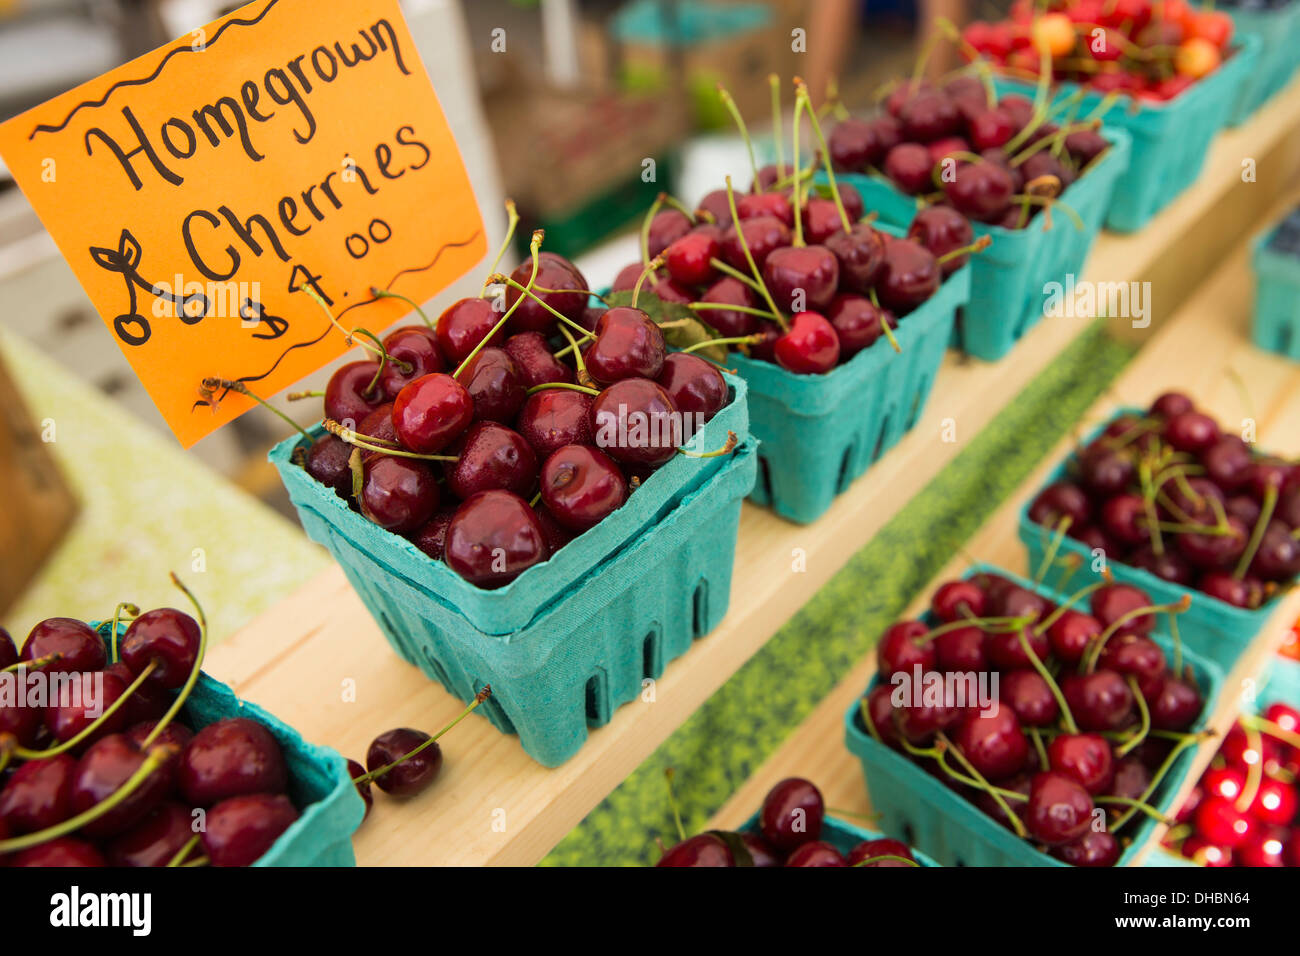 Farm stand with punnets of blueberries and rapsberries for sale, fresh organic fruit. Stock Photo